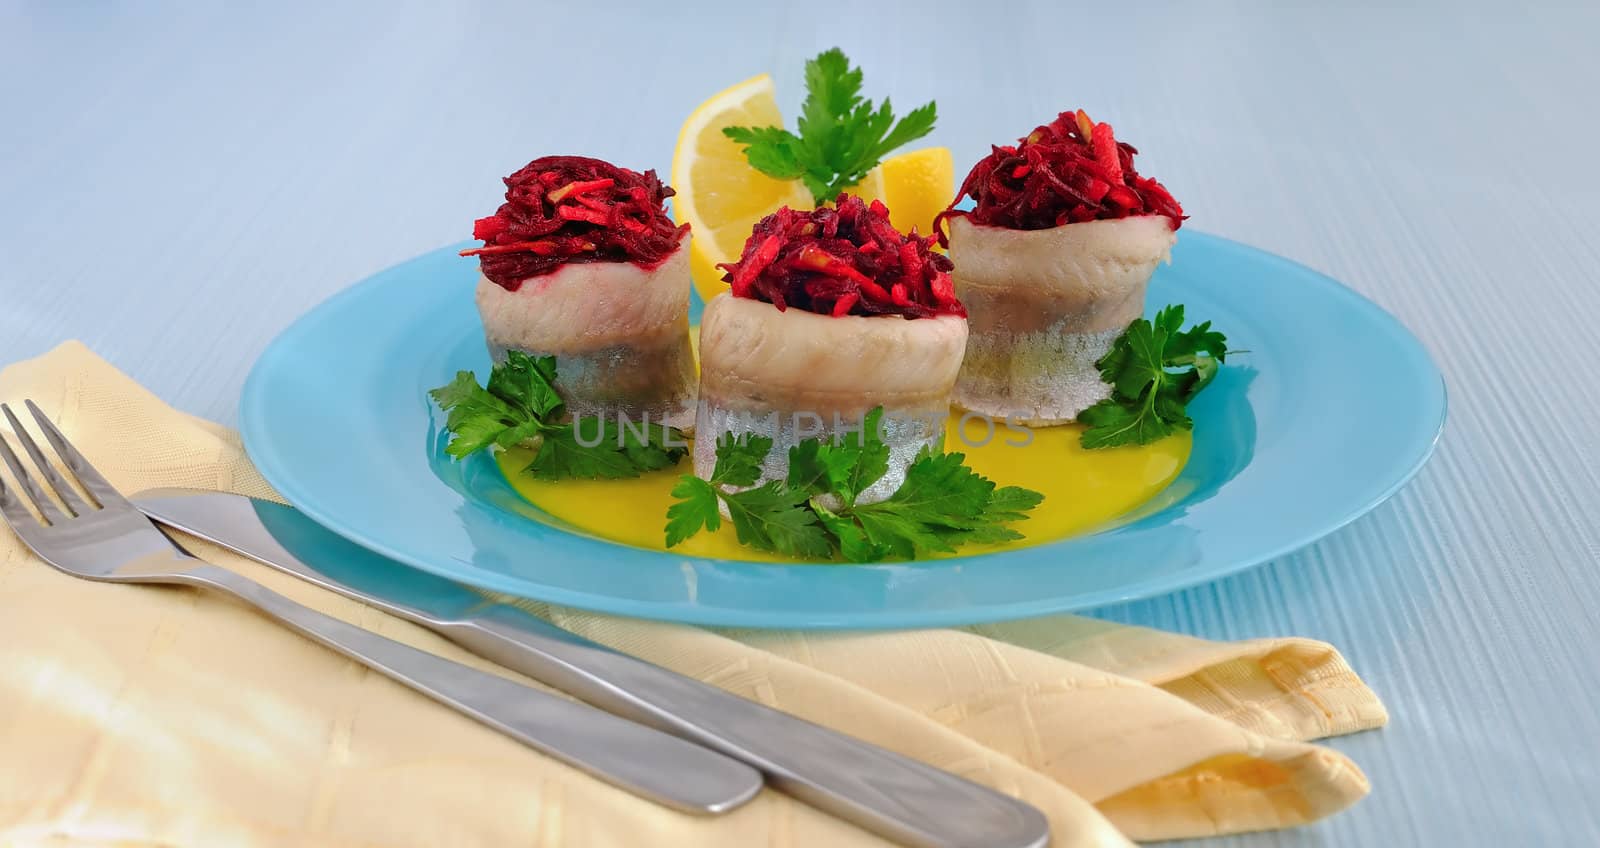 Herring fillet stuffed with beet-apple stuffing by Apolonia